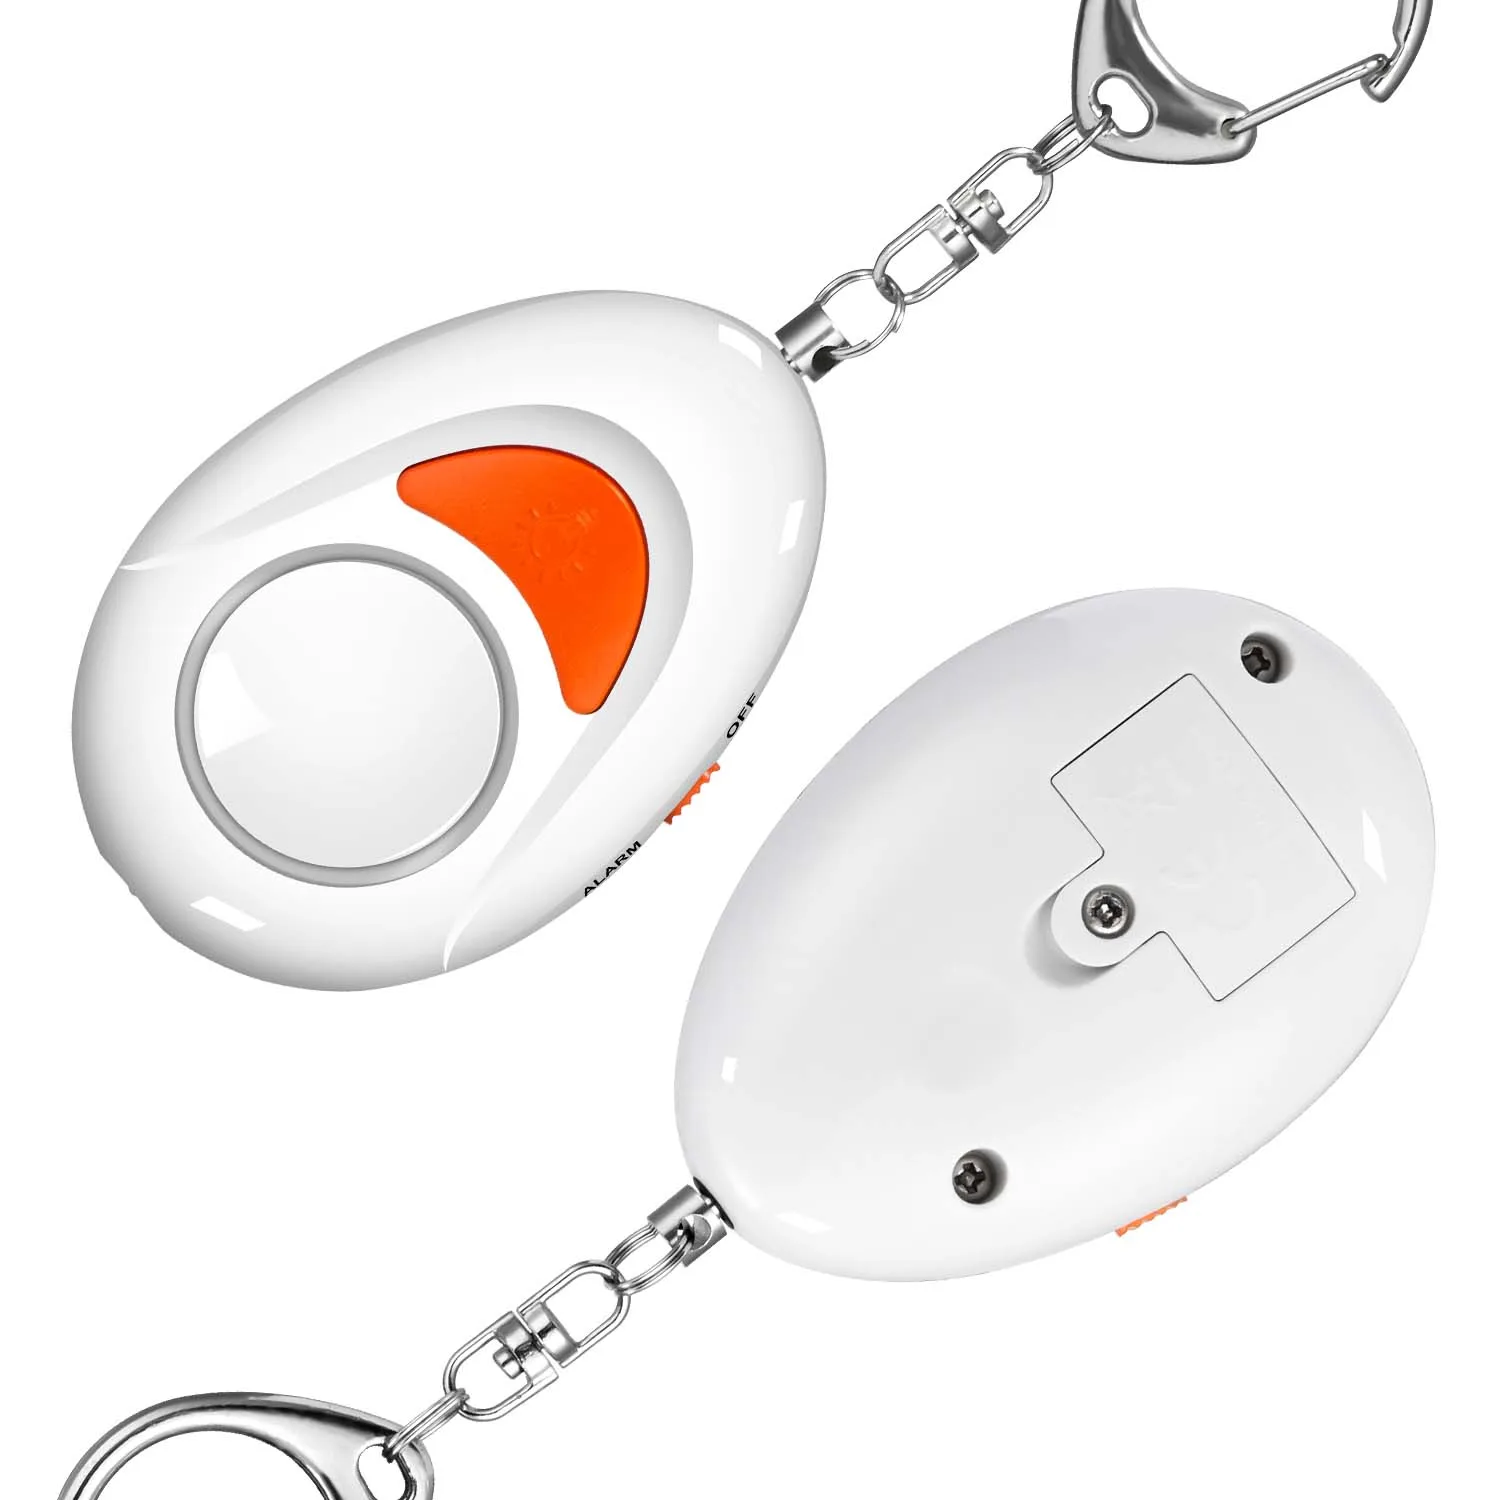 Meinoe new design personal alarm with led light outdoor SOS safety personal alarm